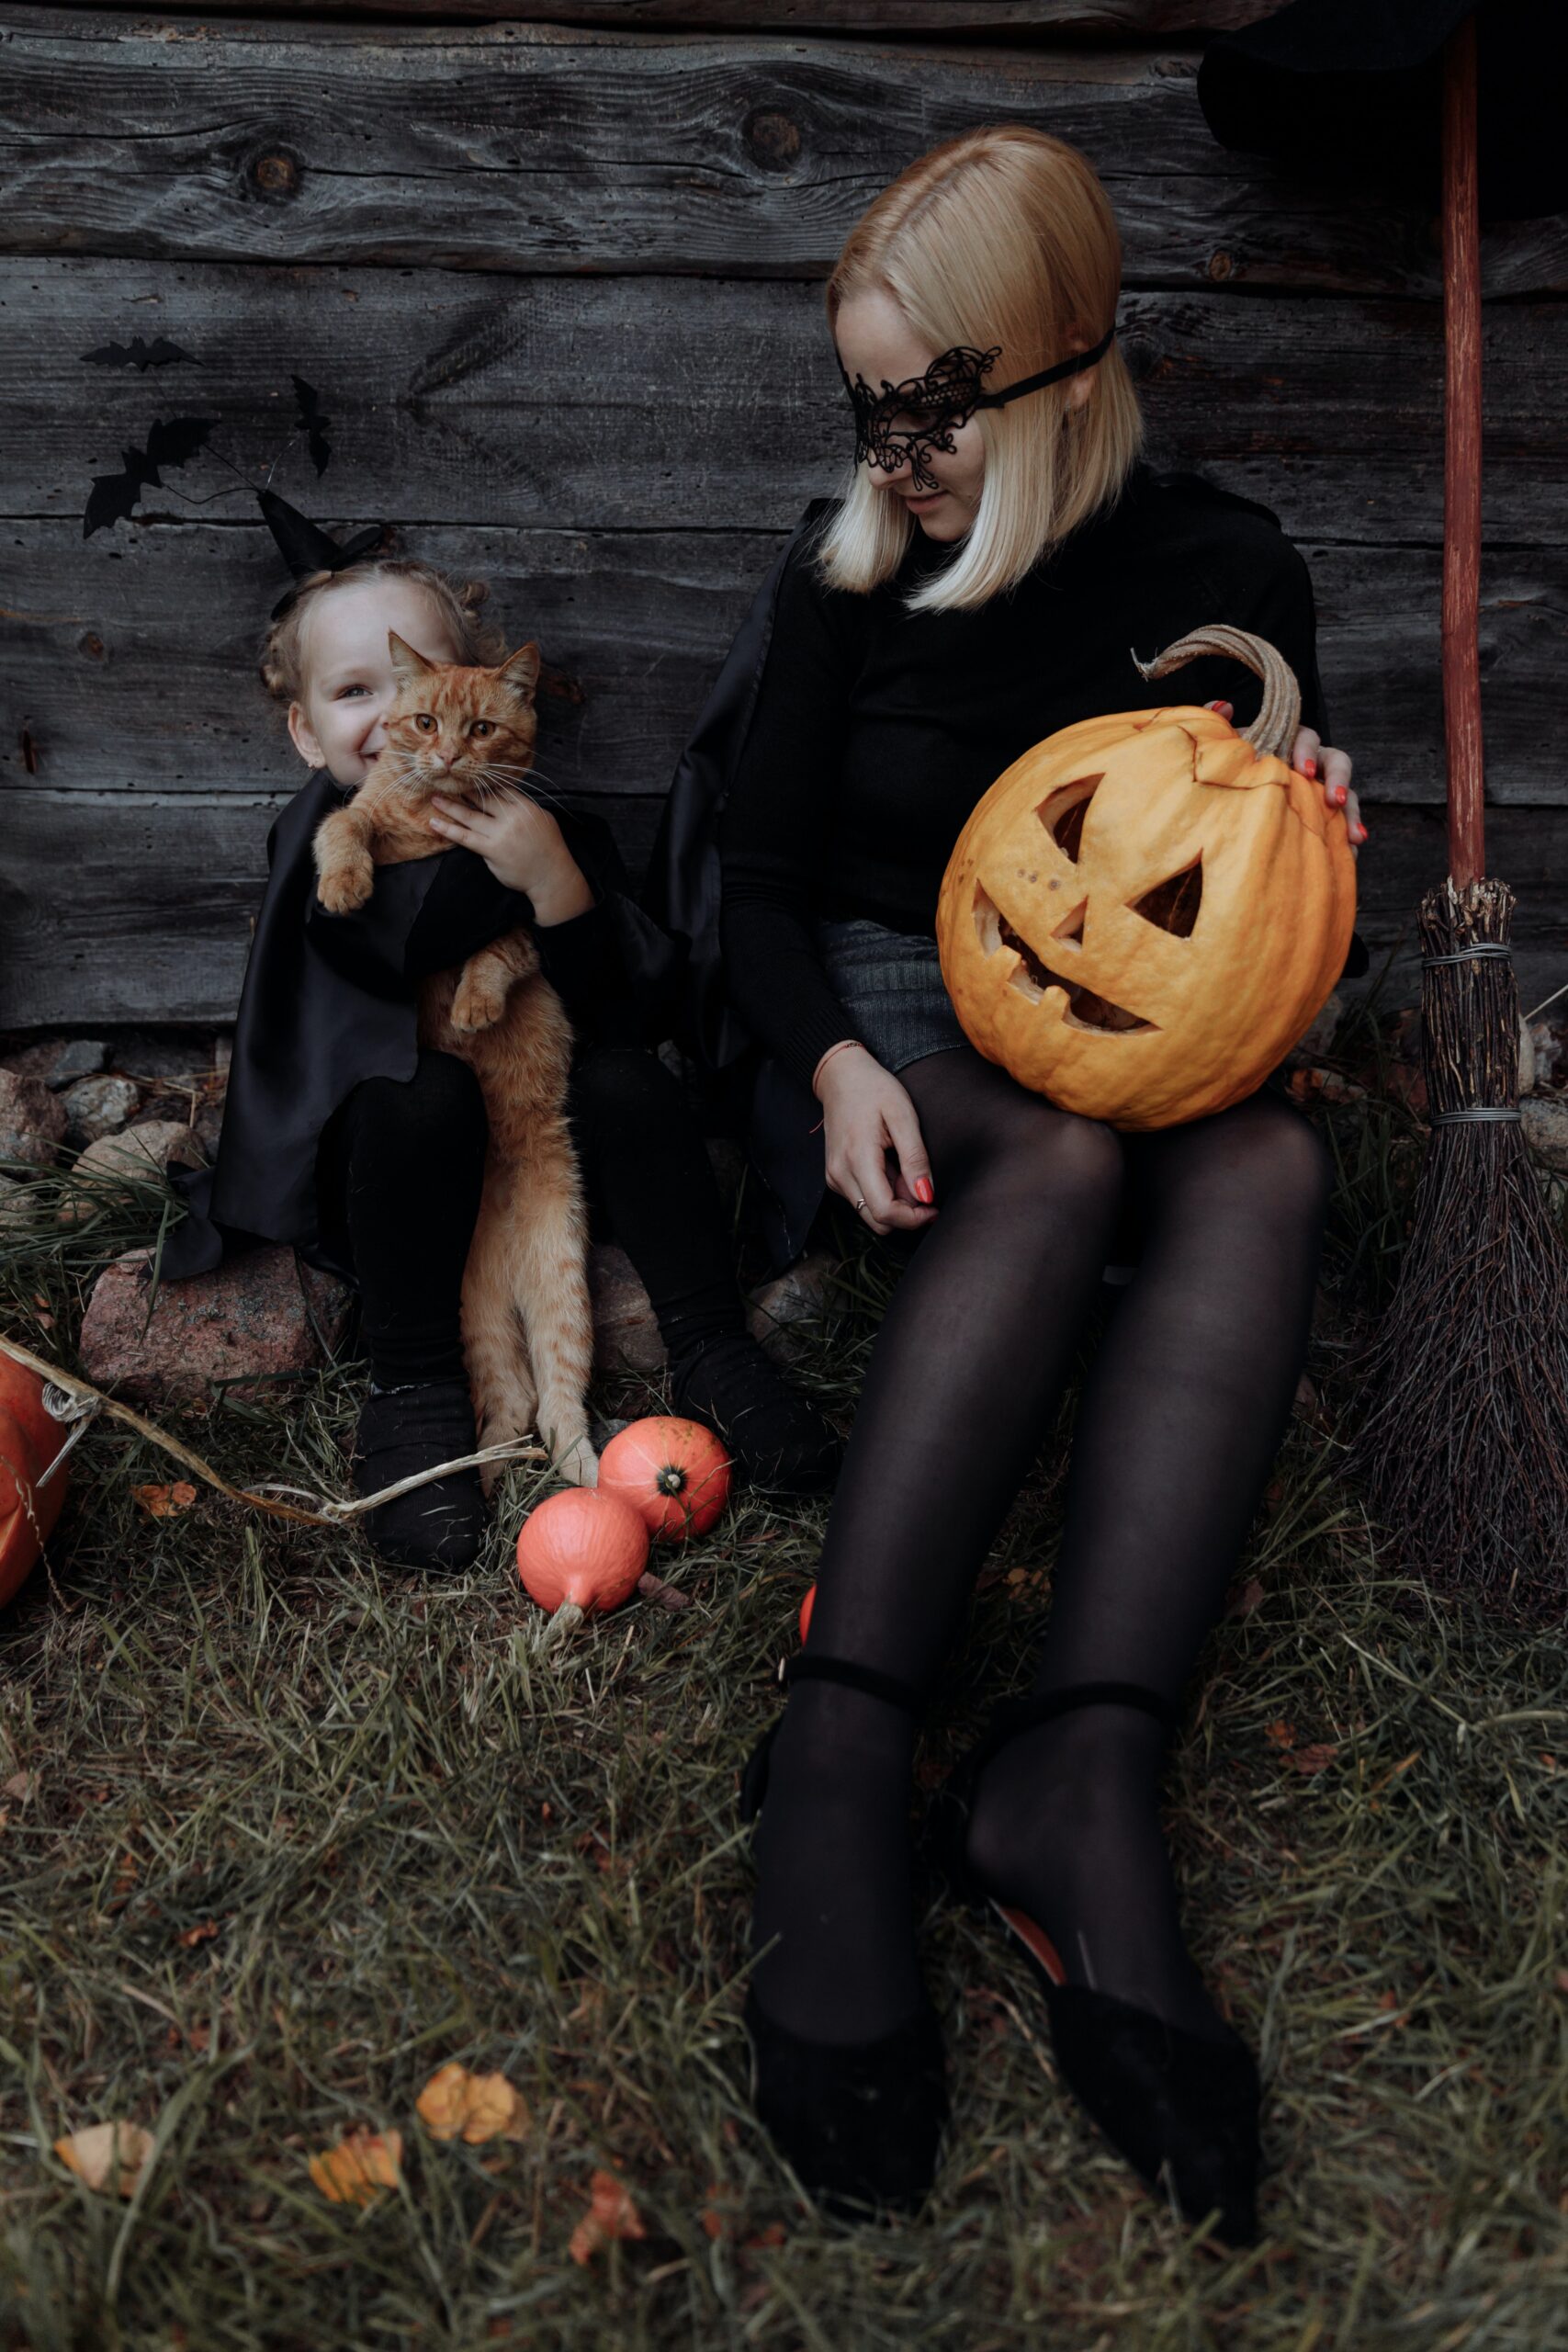 Woman and a little girl in Halloween costumes